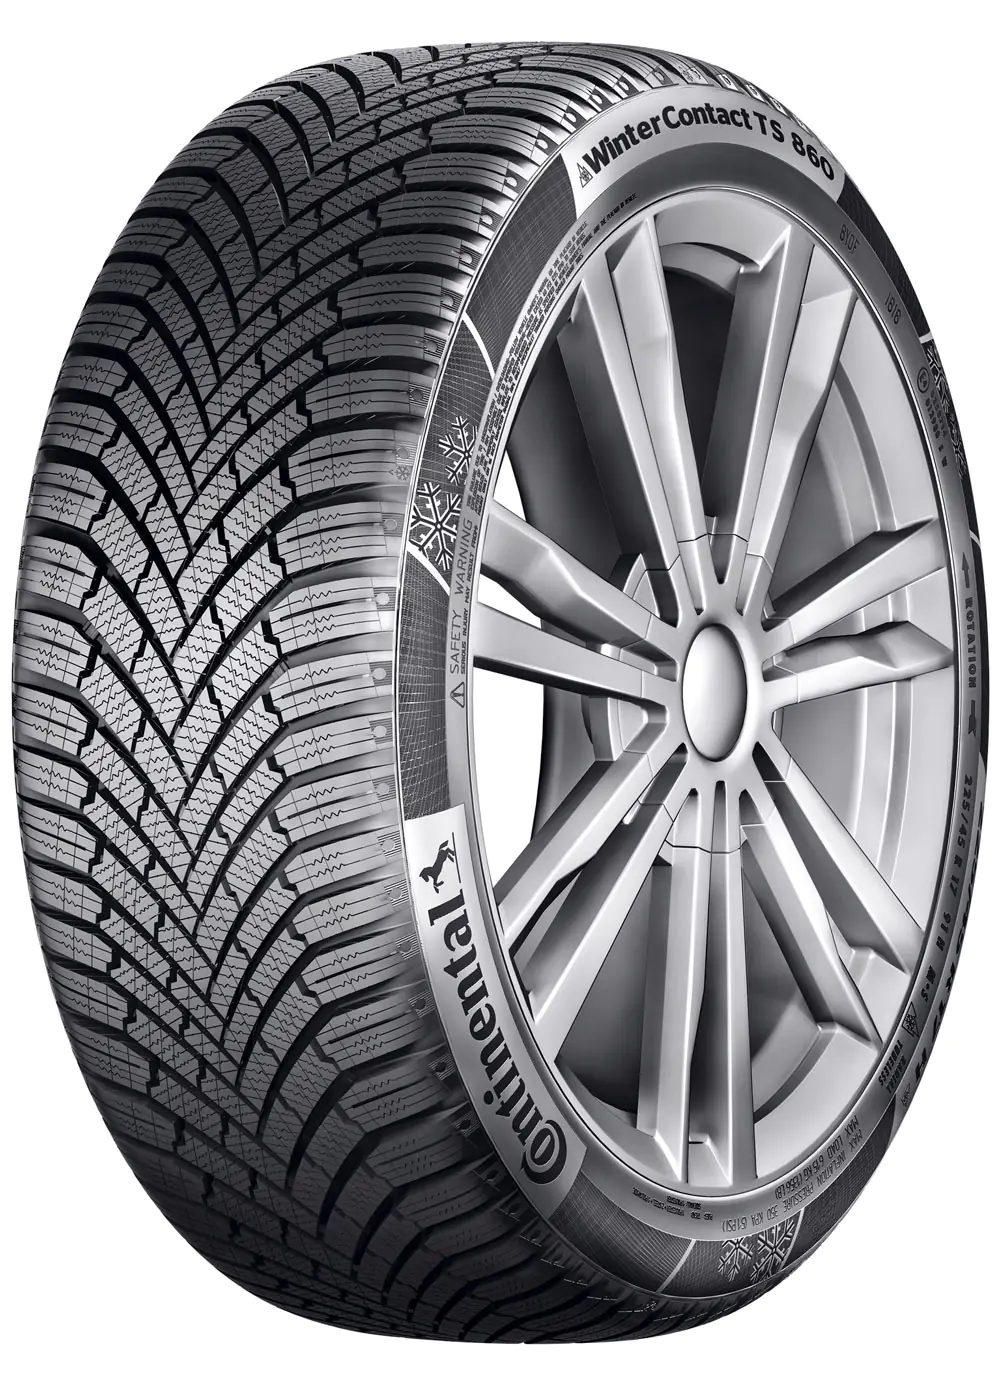 Gomme Autovettura Continental 295/35 R19 104V WinterContact TS860 S FR XL M+S Invernale